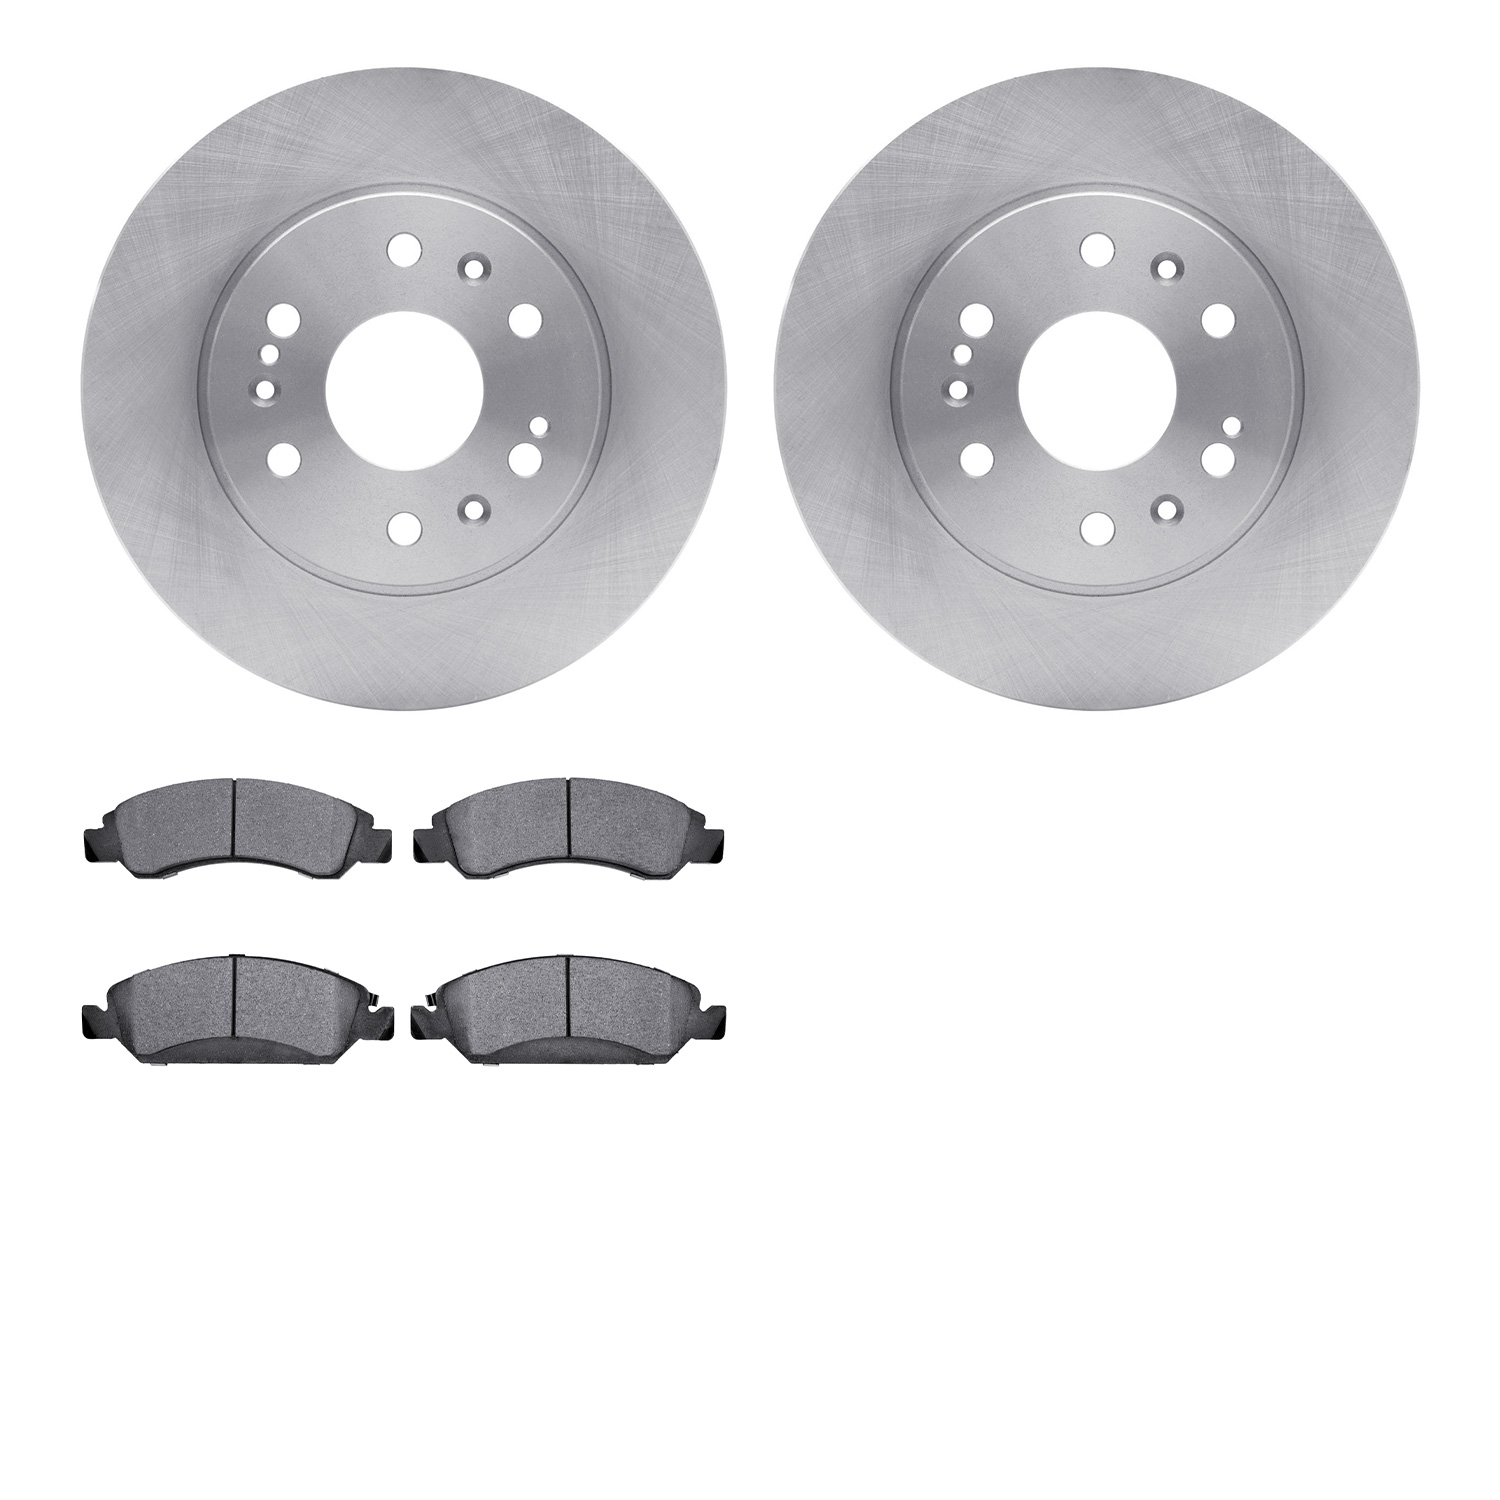 6402-48101 Brake Rotors with Ultimate-Duty Brake Pads, 2005-2020 GM, Position: Front